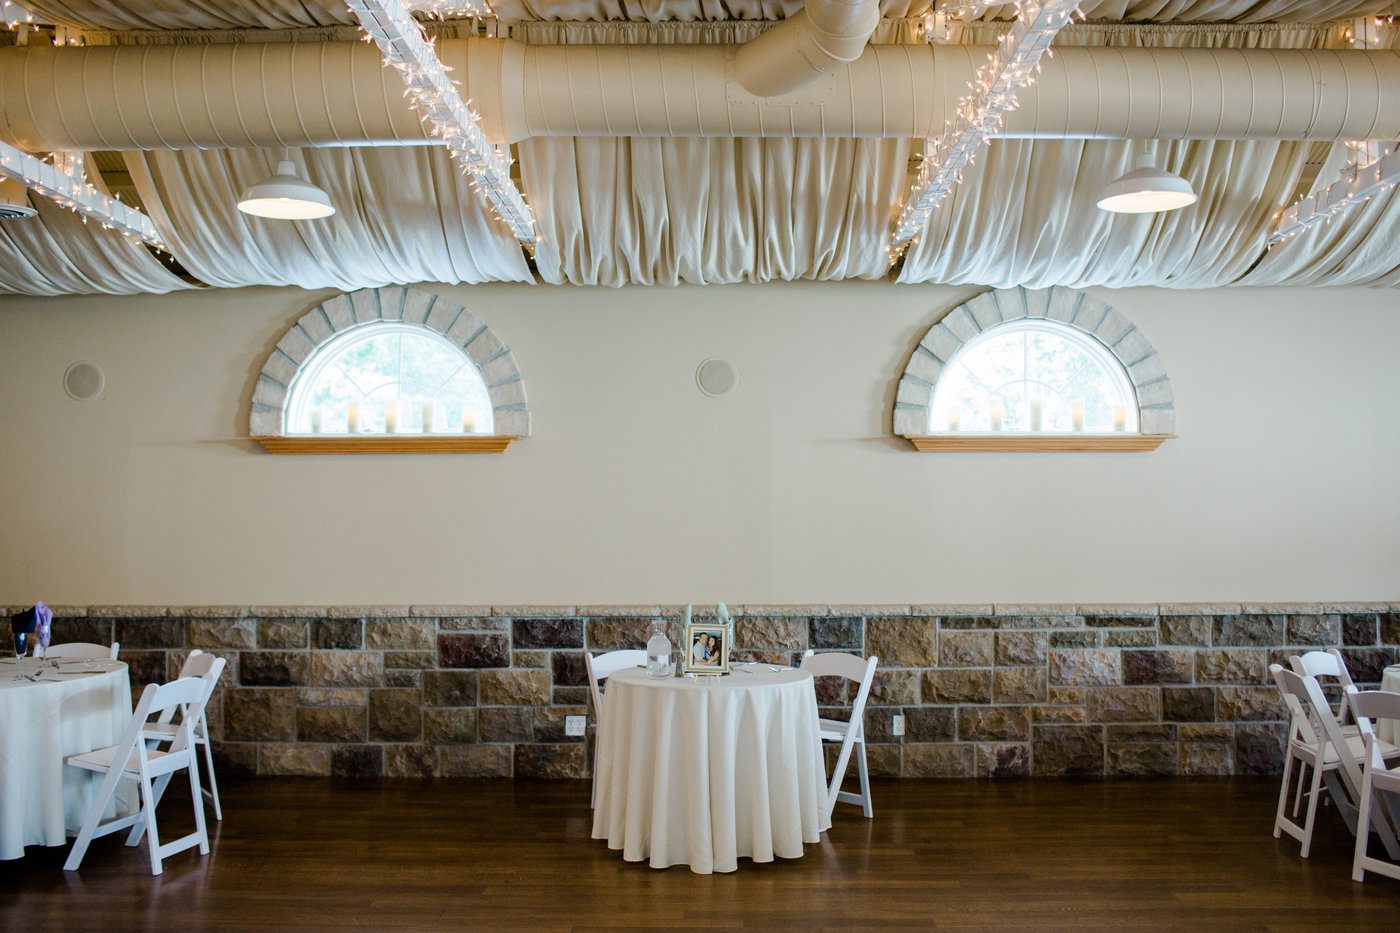 Tapestry House Wedding Reception